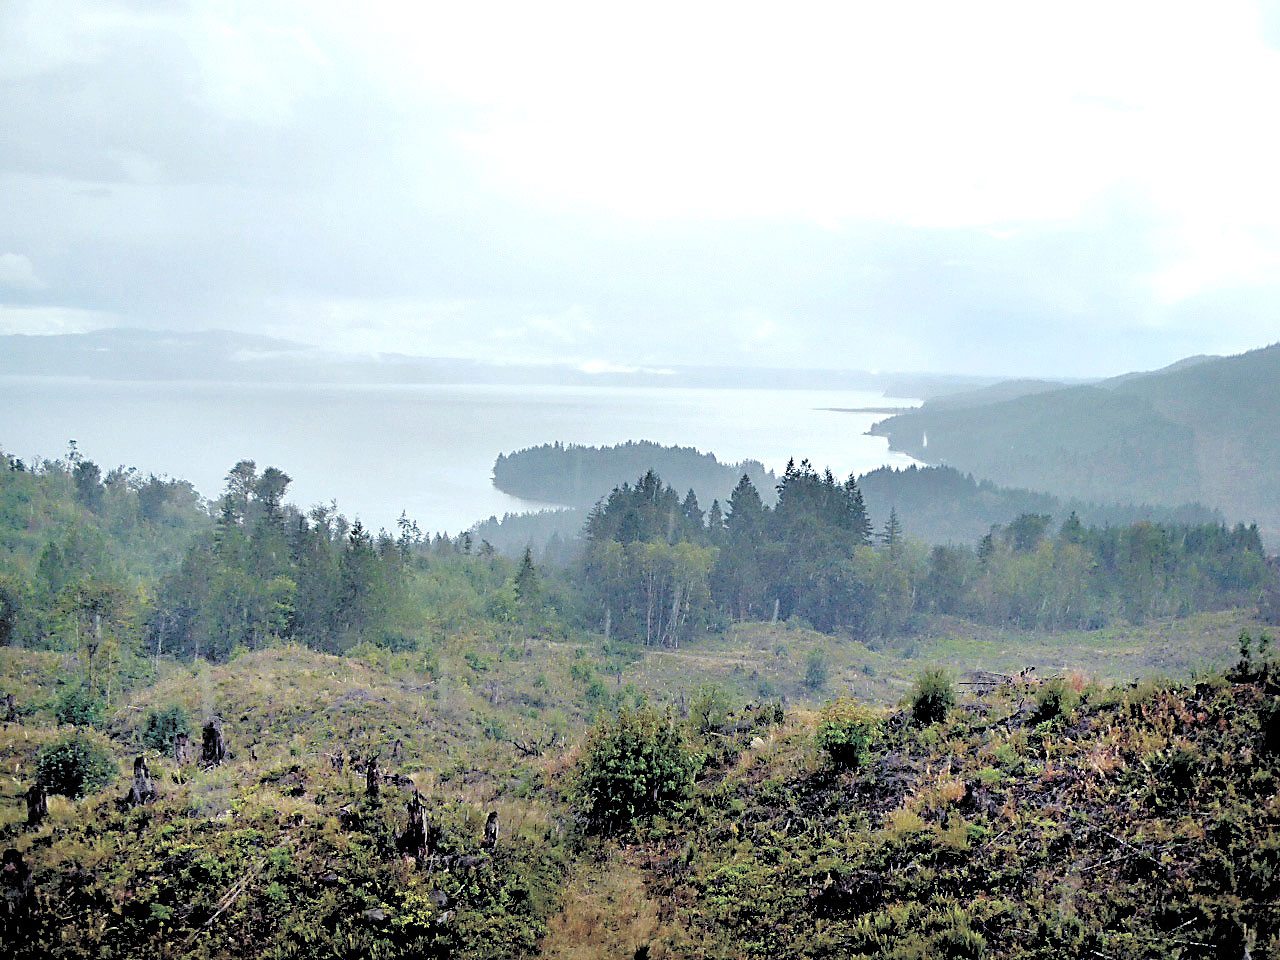 The Dabob Bay Natural Resource Conservation Area will grow by 3,393 acres under an executive order from commissioner of public lands Peter Goldmark. (Peninsula Daily News)